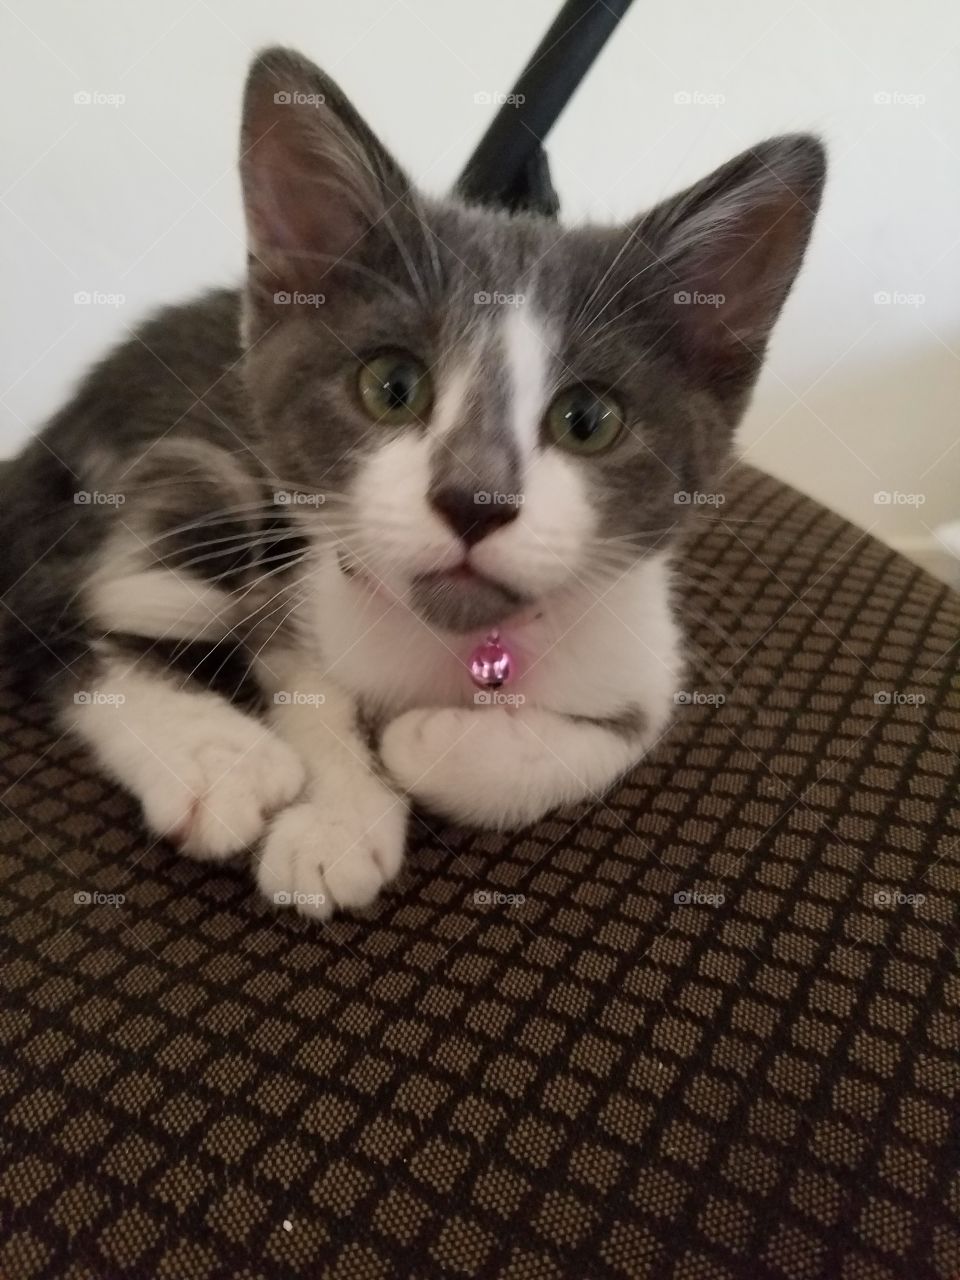 Hello let me introduce myself as Socks the kitten. I was adopted into amazing family. I live with my mom in Arizona.